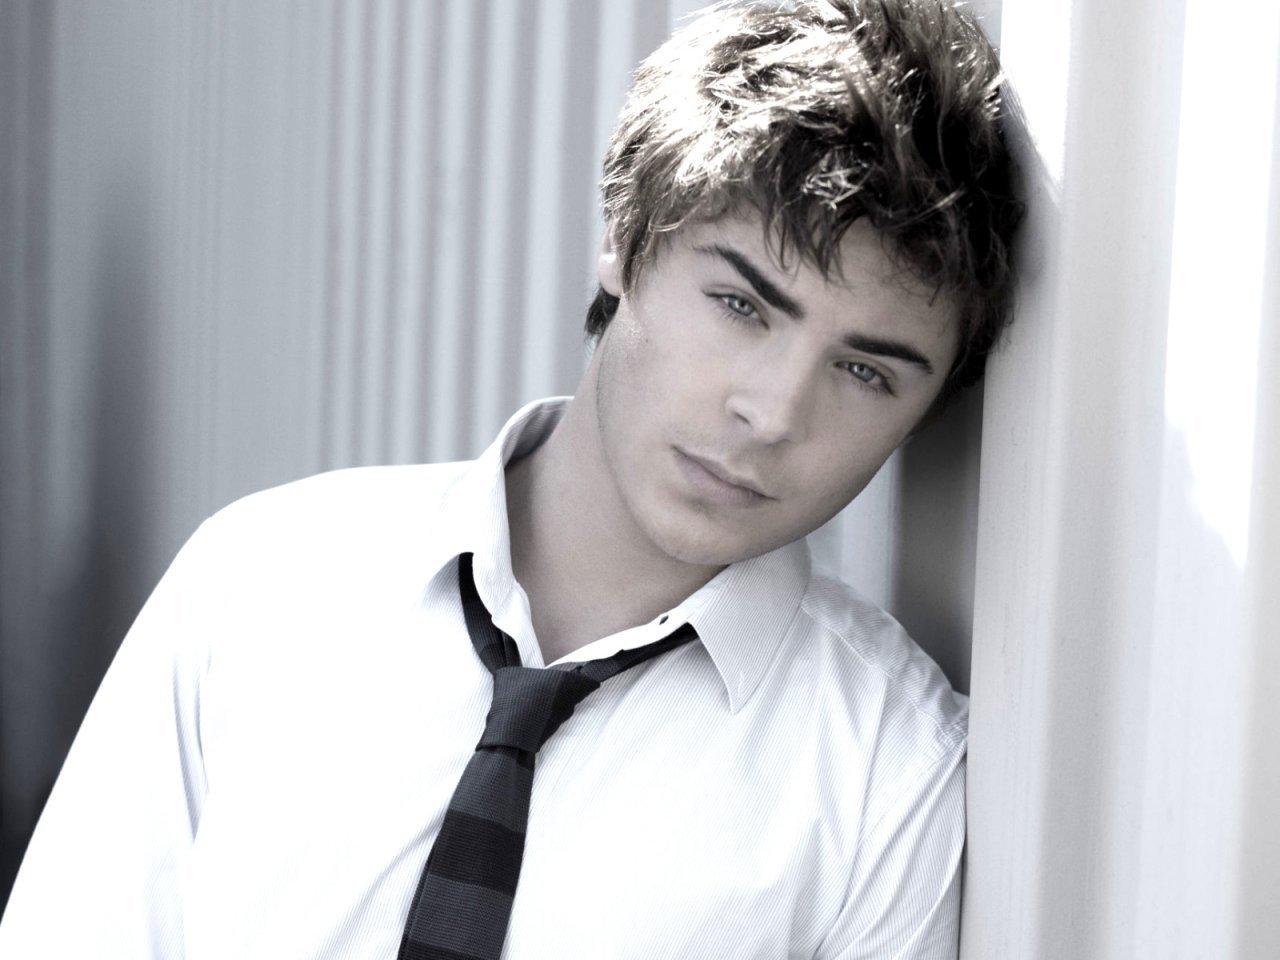 Zac Efron HD Wallpaper. It's All About Wallpaper